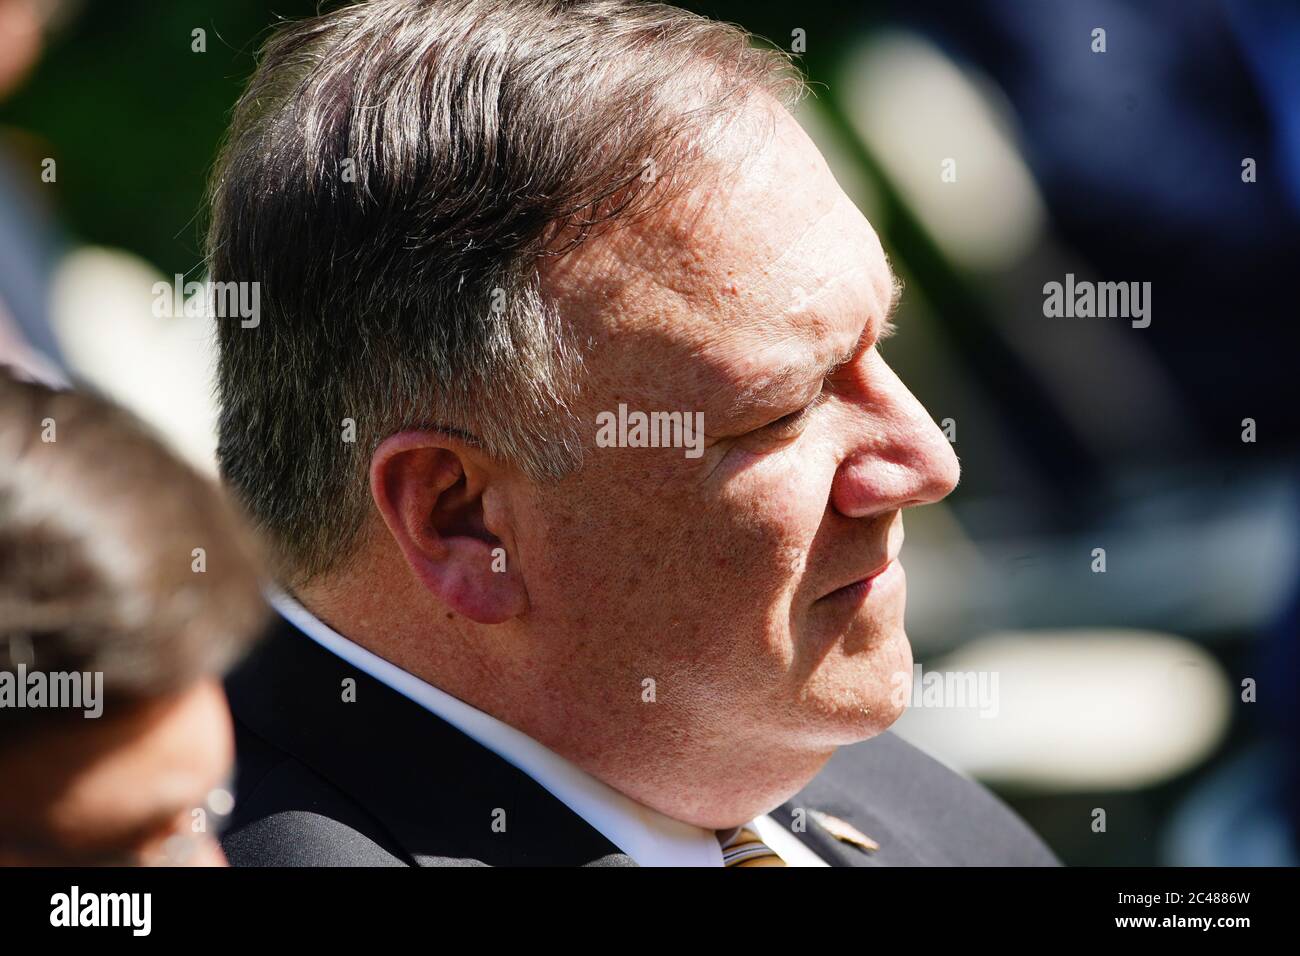 US Secretary of State Mike Pompeo listens as US President Donald J. Trump and Polish President Andrzej Duda hold a joint press conference in the Rose Garden of the White House in Washington, DC, USA, 24 June 2020. Duda, a conservative nationalist facing a tight re-election race back home, is the first foreign leader to visit the White House in more than three months.Credit: Jim LoScalzo/Pool via CNP /MediaPunch Stock Photo